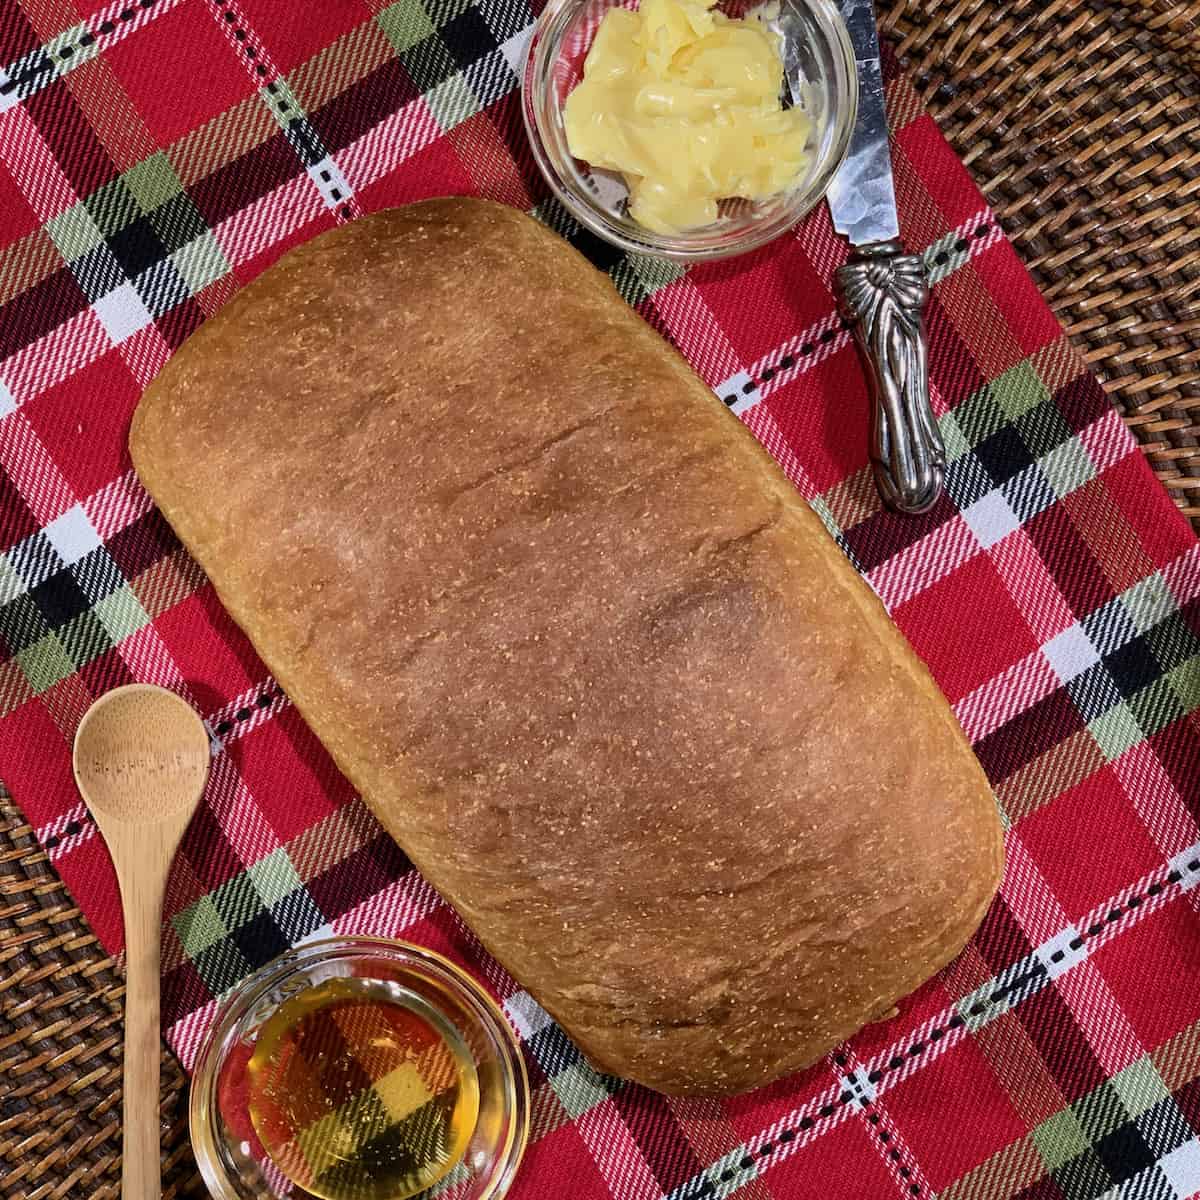 Unsliced Colonial Bread on plaid towel with butter and honey from overhead.